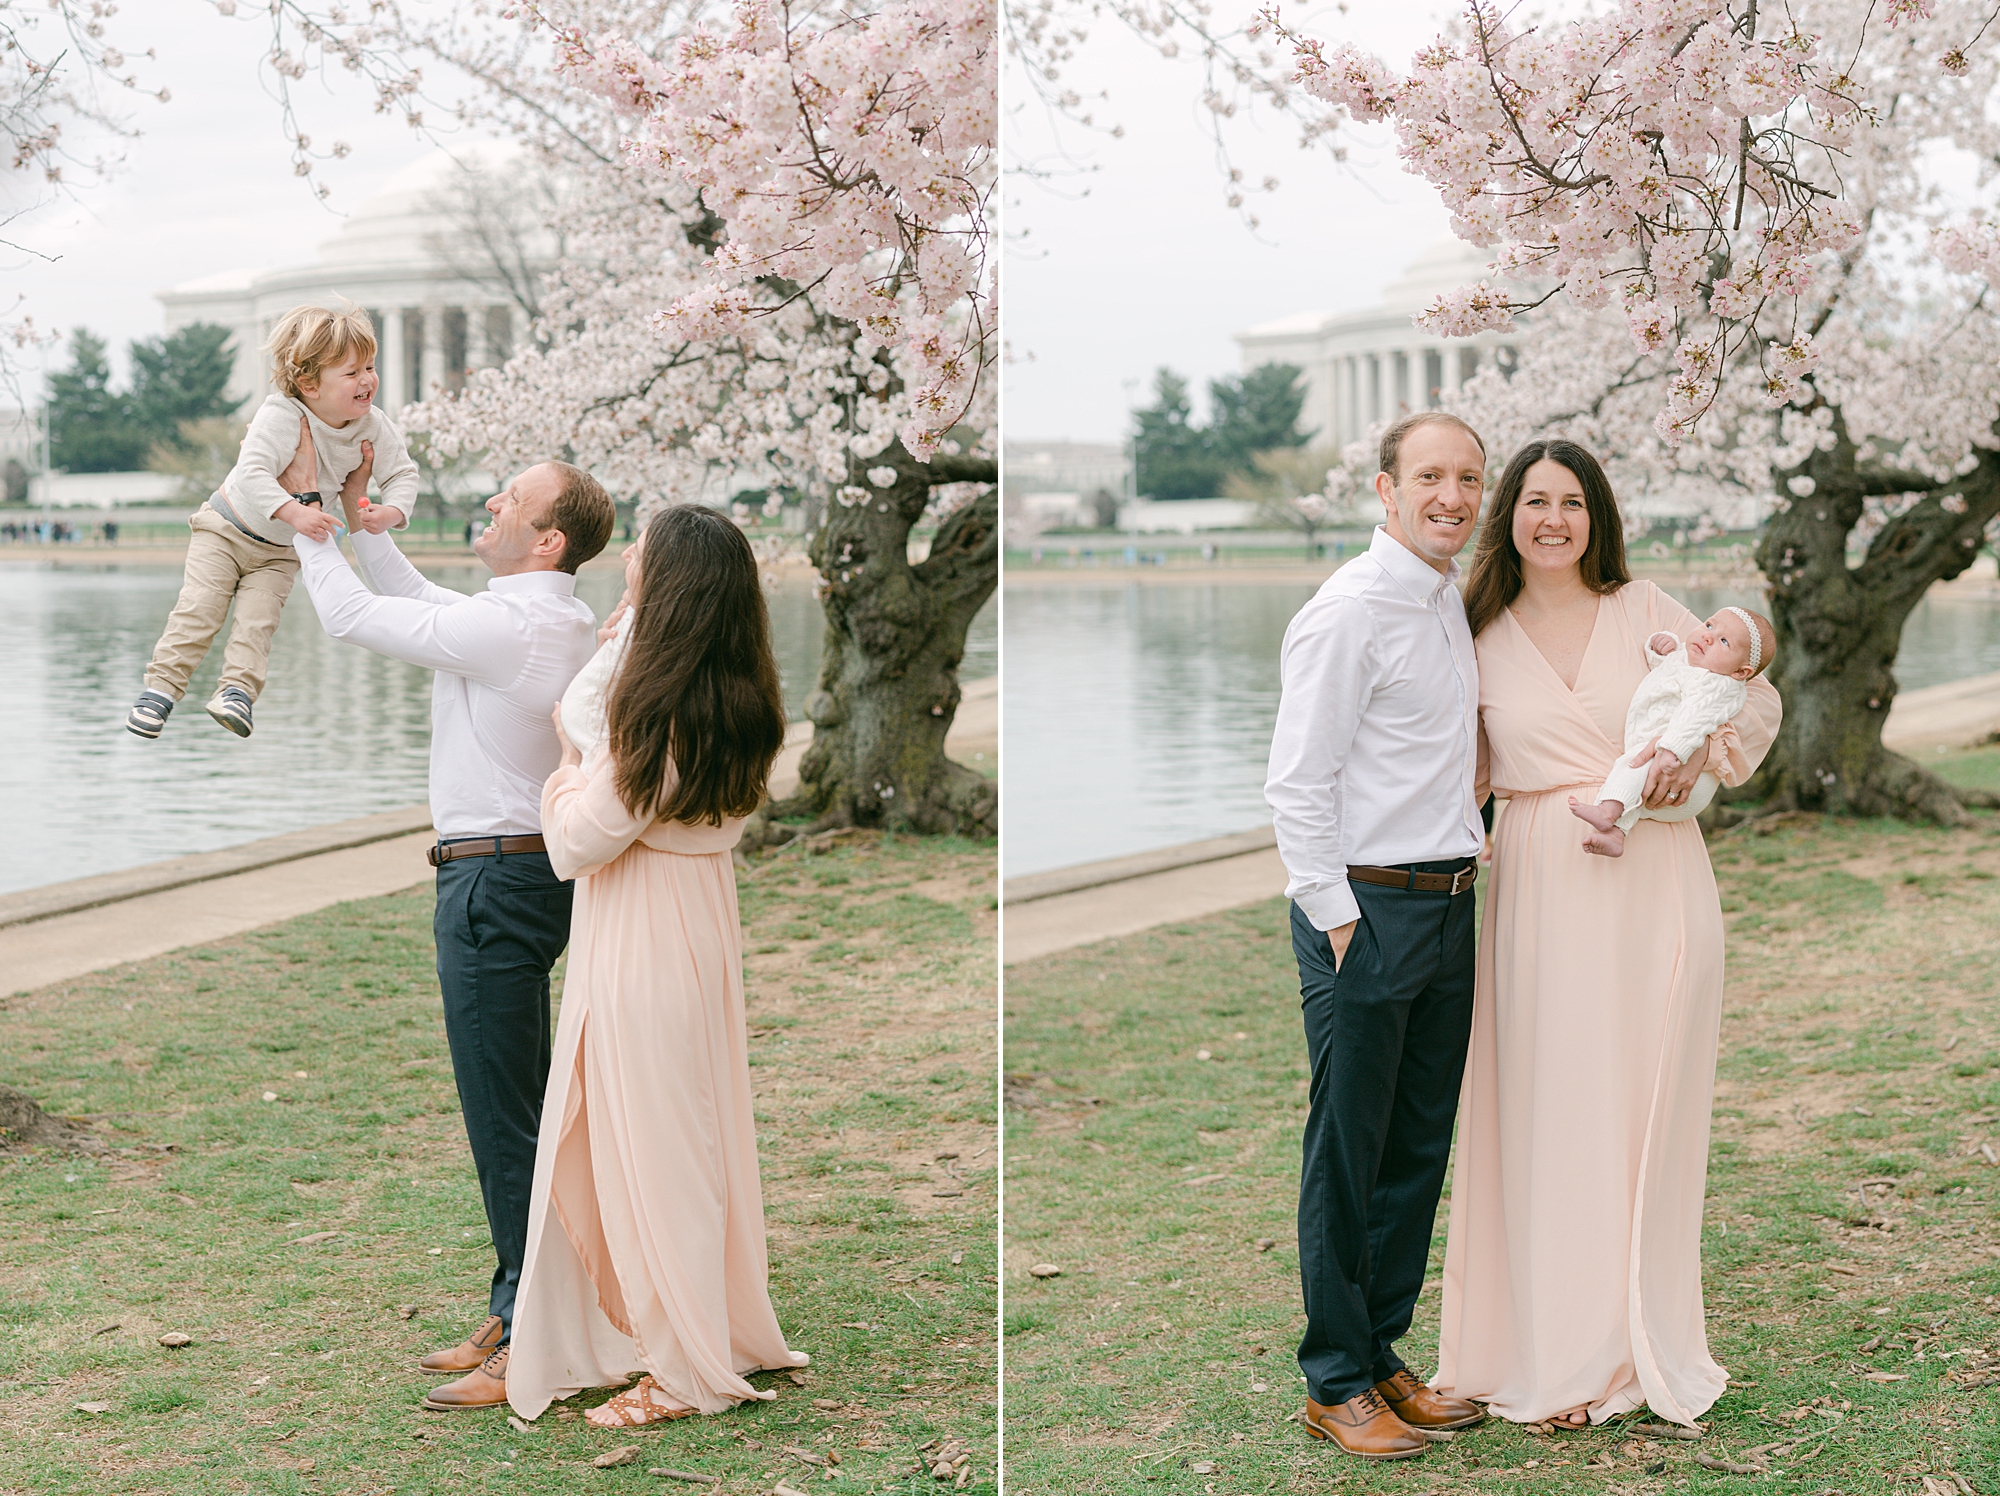 parents lift up son and daughter during cherry blossom portraits at the Tidal Basin